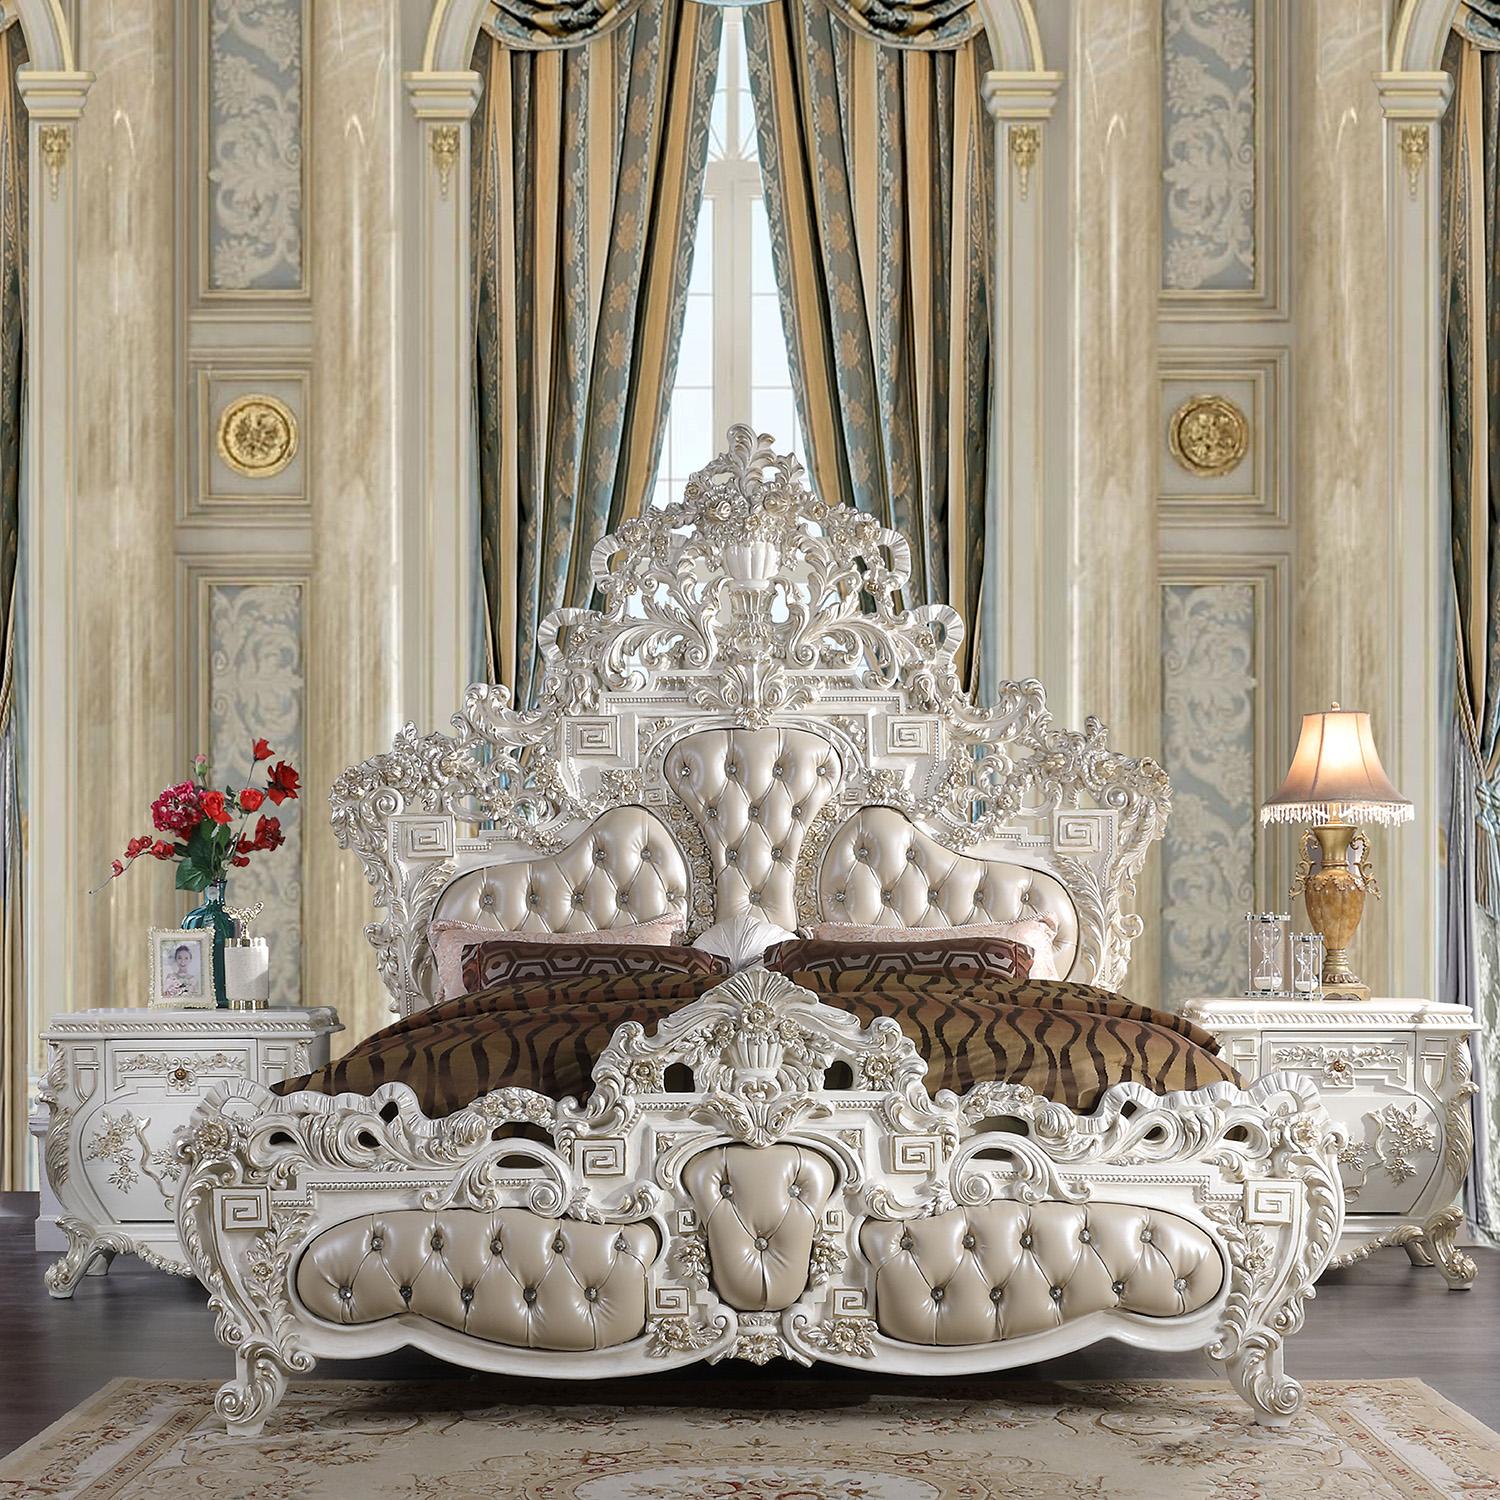 

    
Pearl Cream & White Tufted CAL KING Bedroom Set 5 Pcs Traditional Homey Design HD-1807
